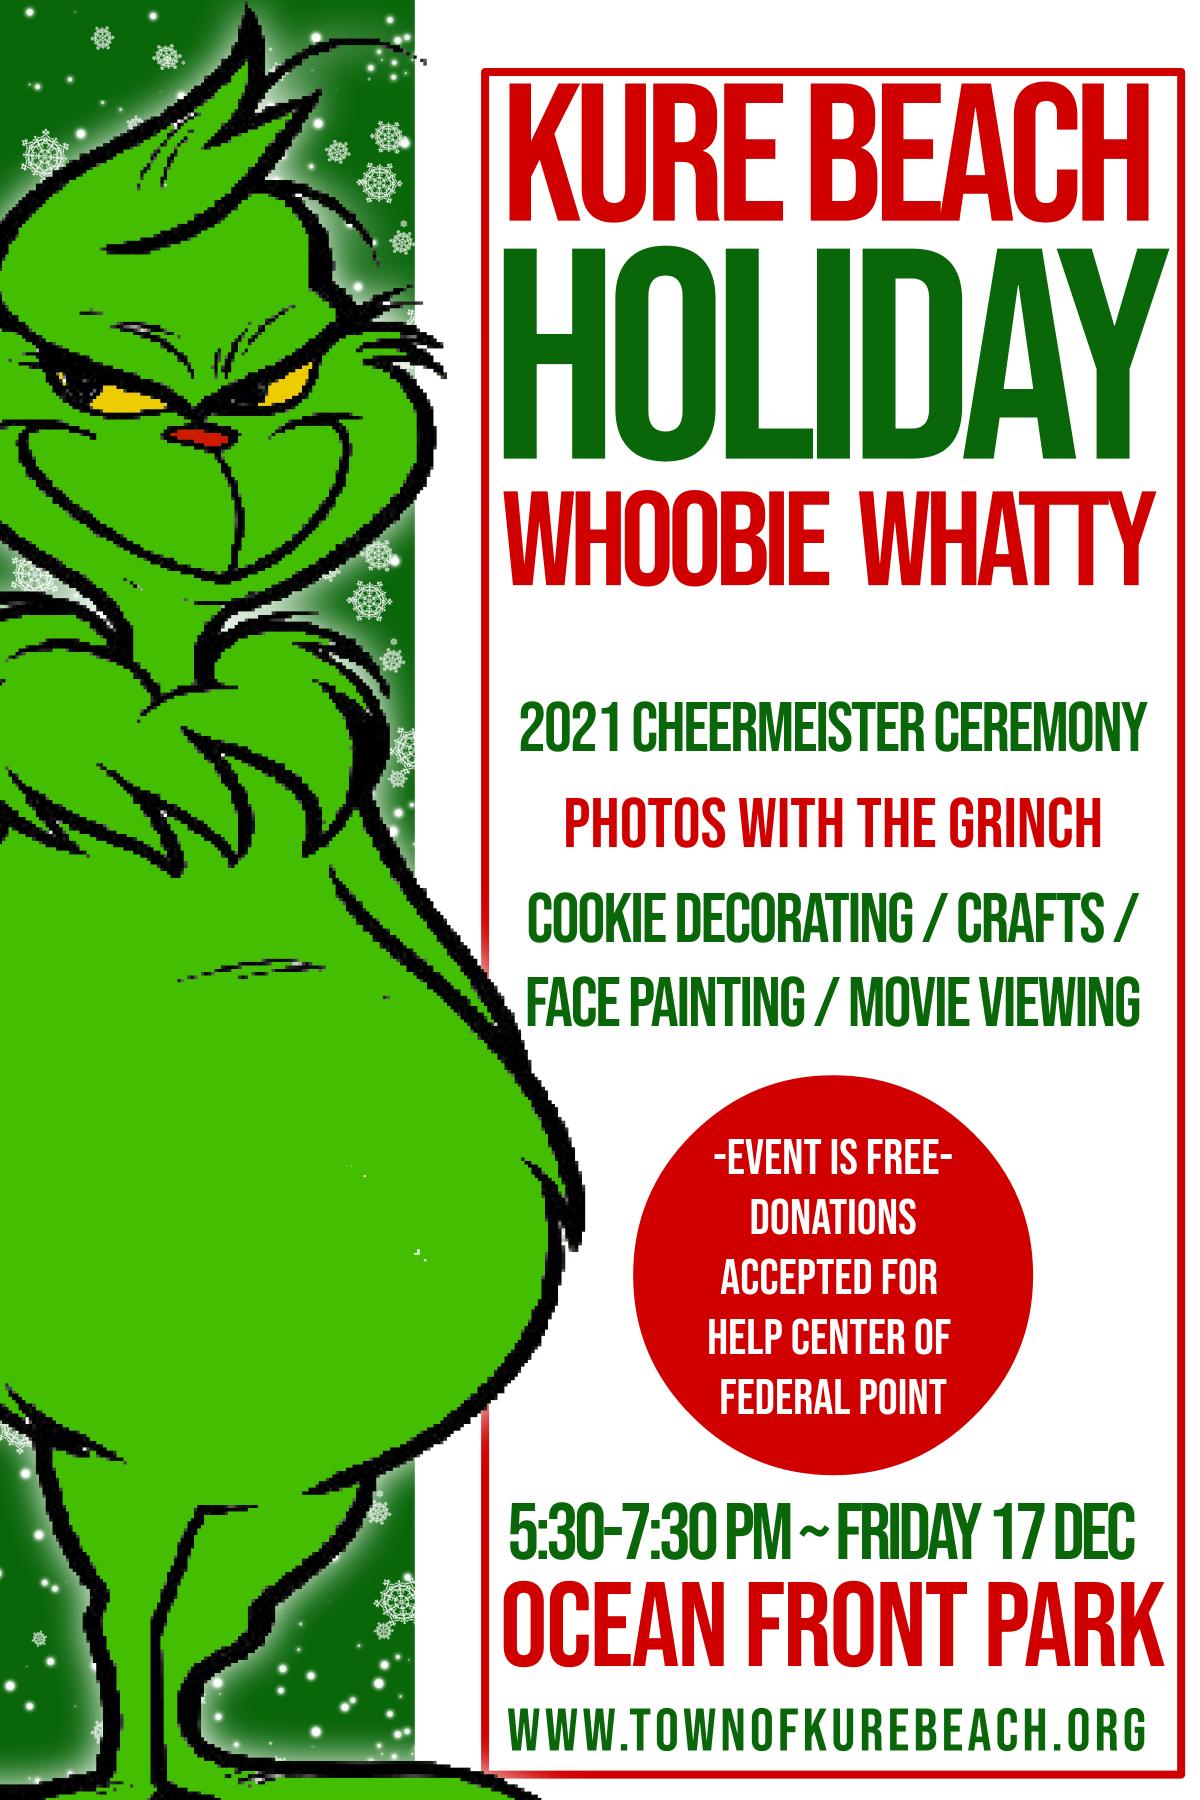 Holiday Whoobie Whatty Information Flyer